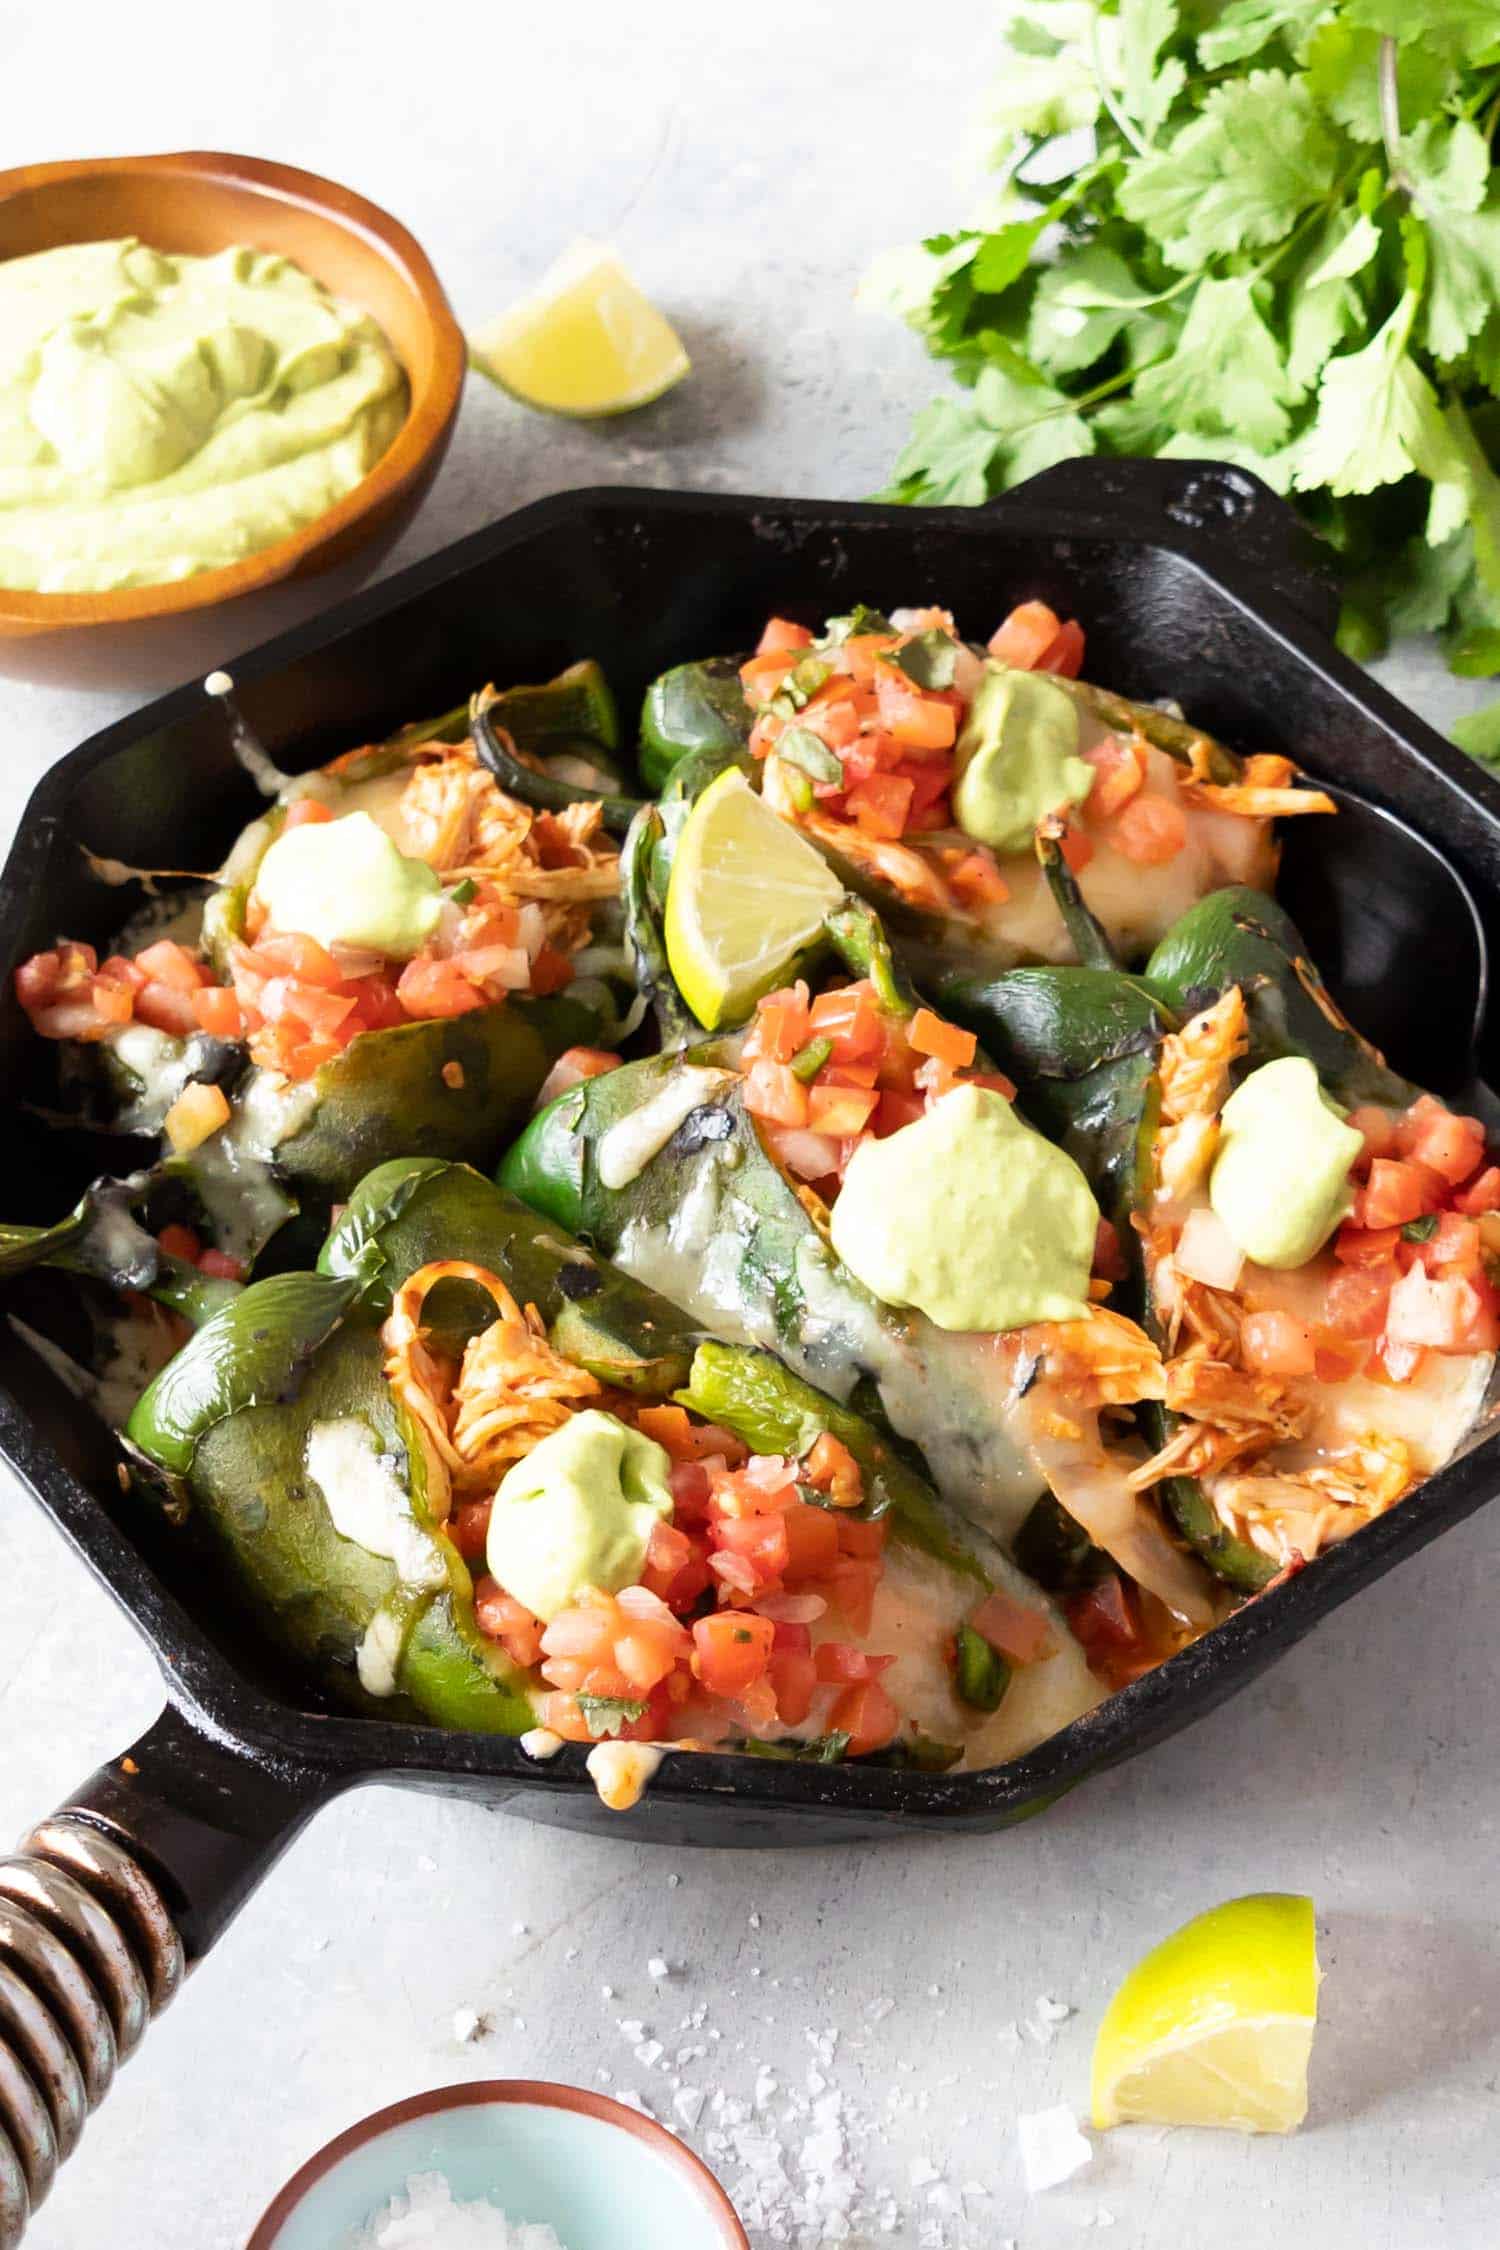 Chicken Stuffed Poblano Peppers in cast iron skillet